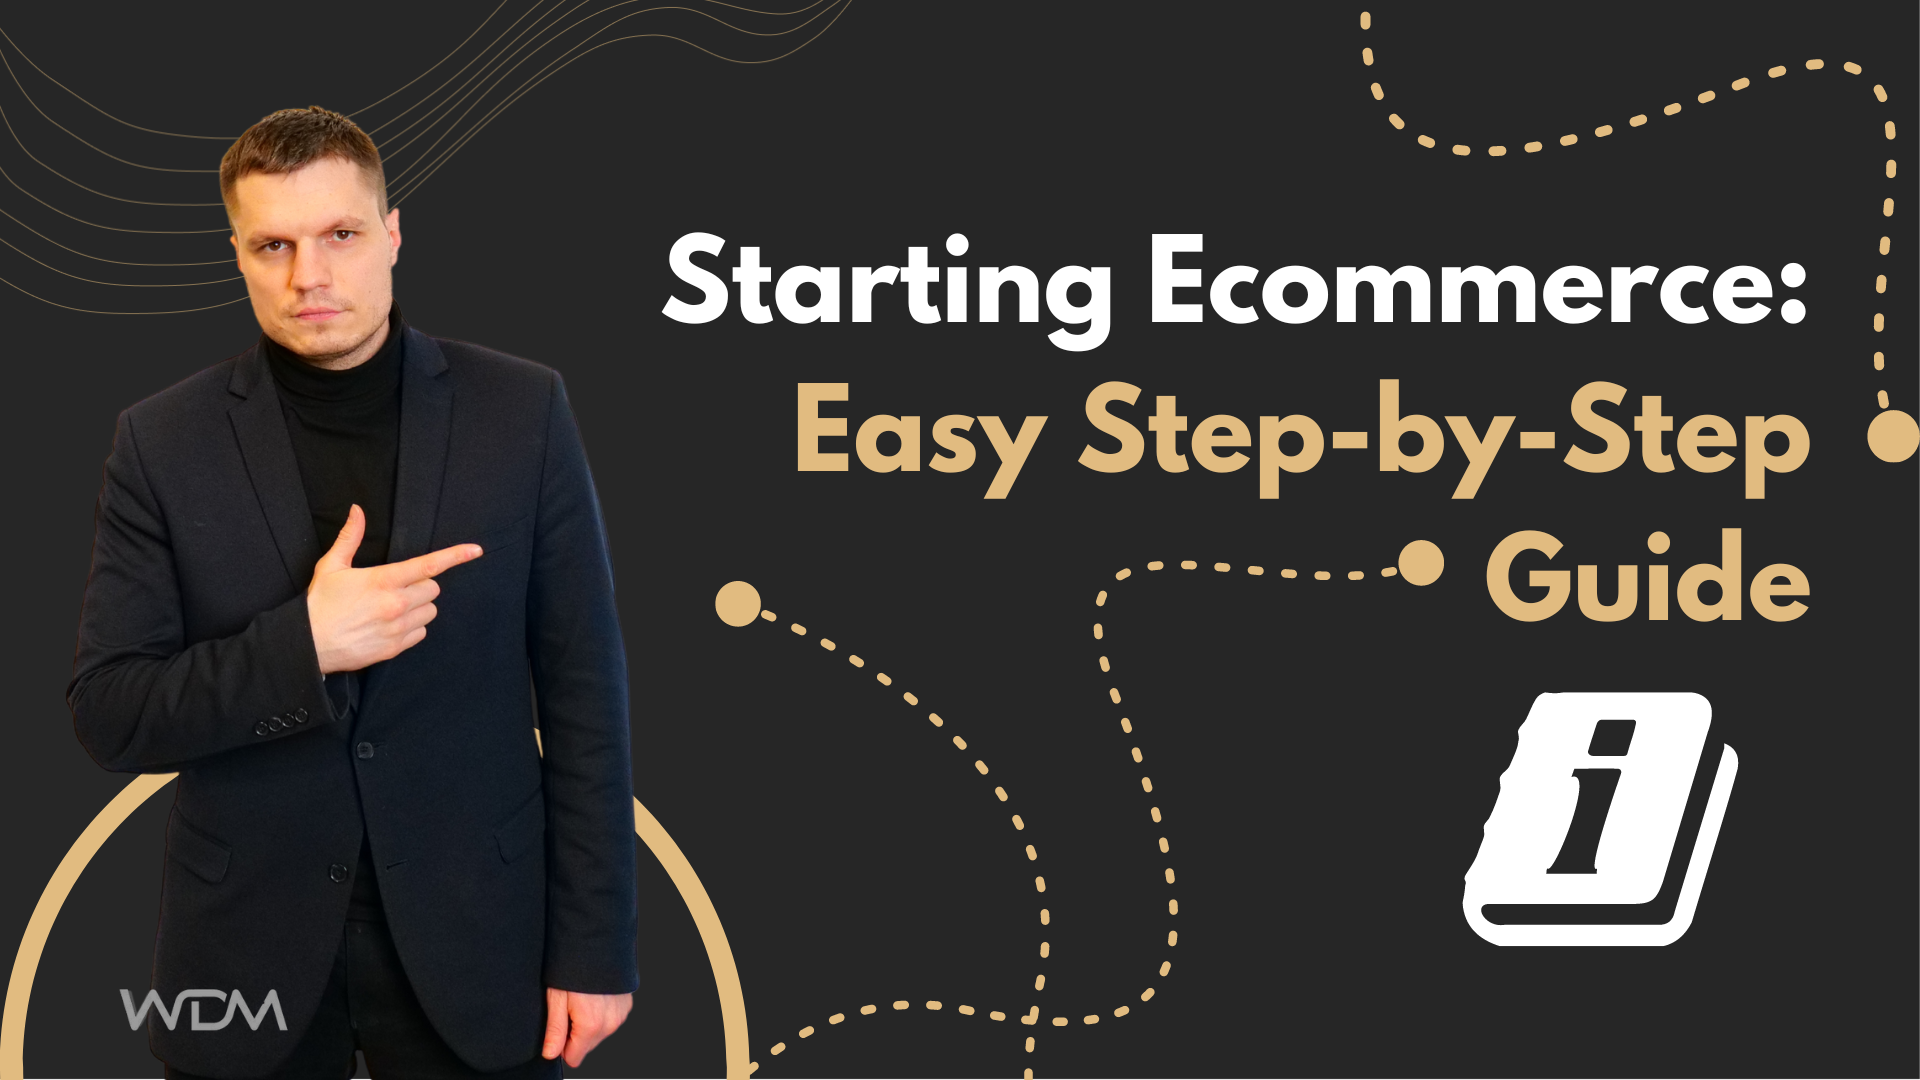 Starting Ecommerce Easy Step-by-Step Guide